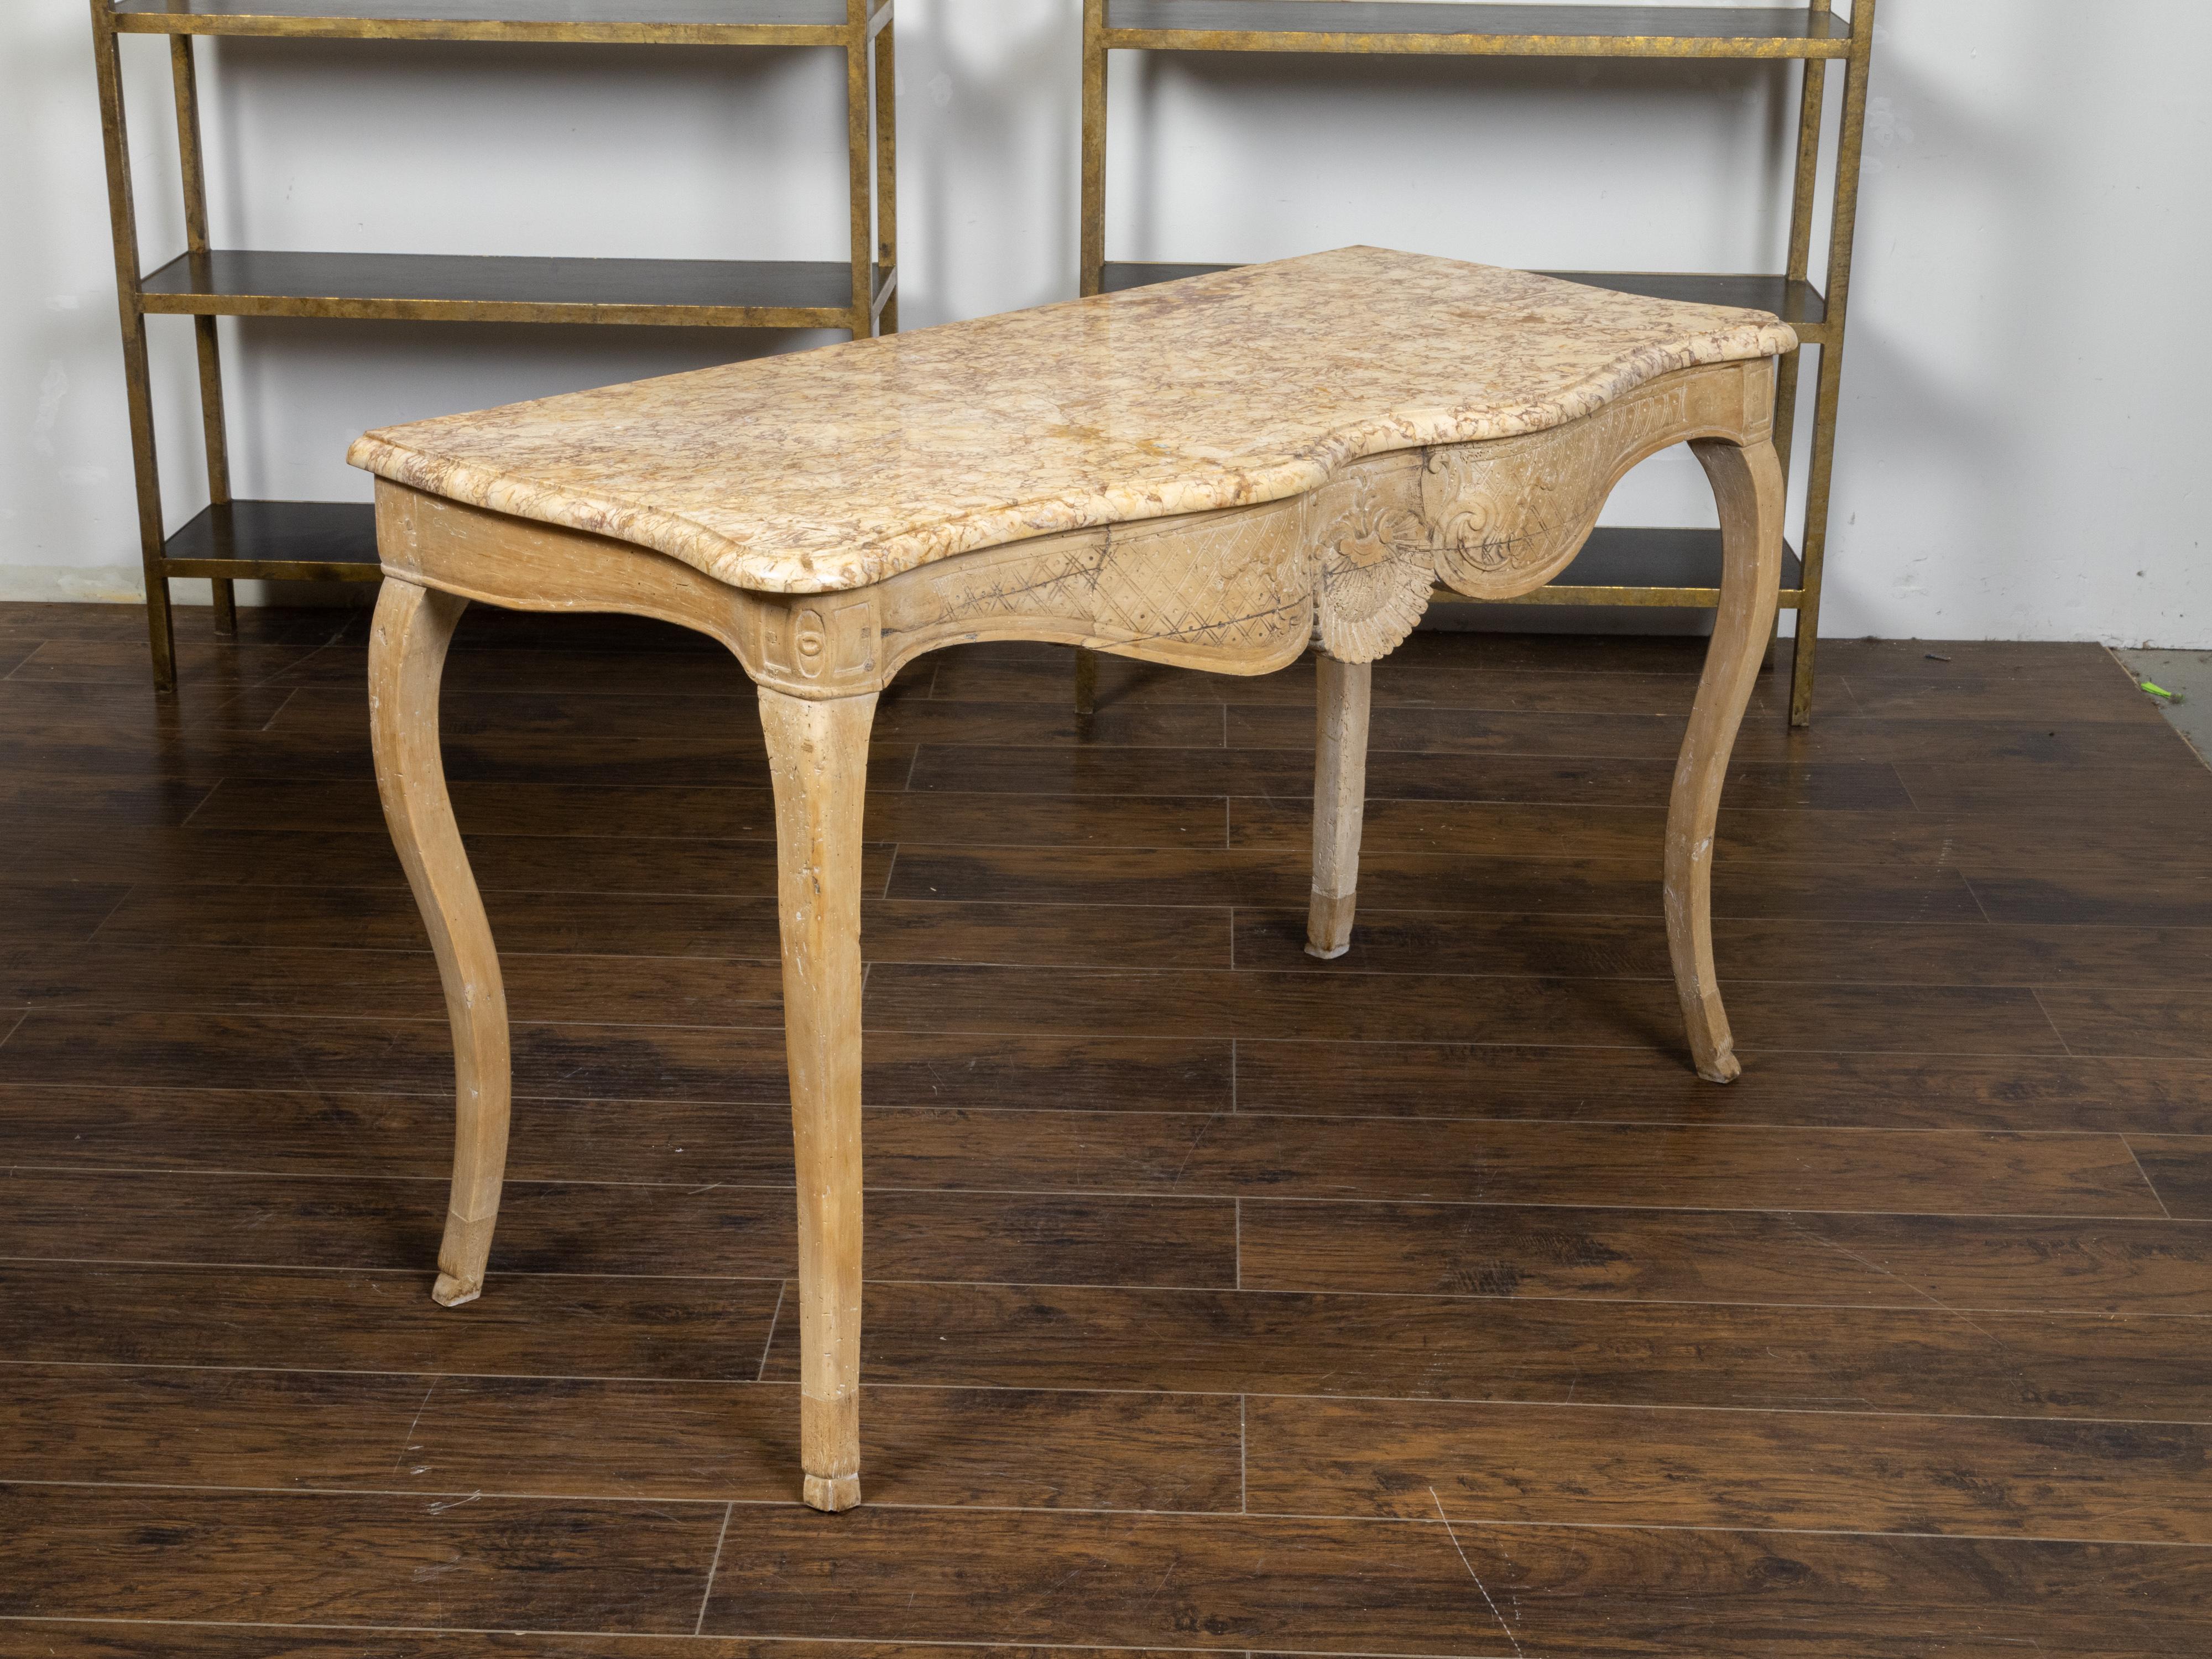 French Rococo 18th Century Beech Wood Marble Top Console Table with Carved Apron For Sale 3